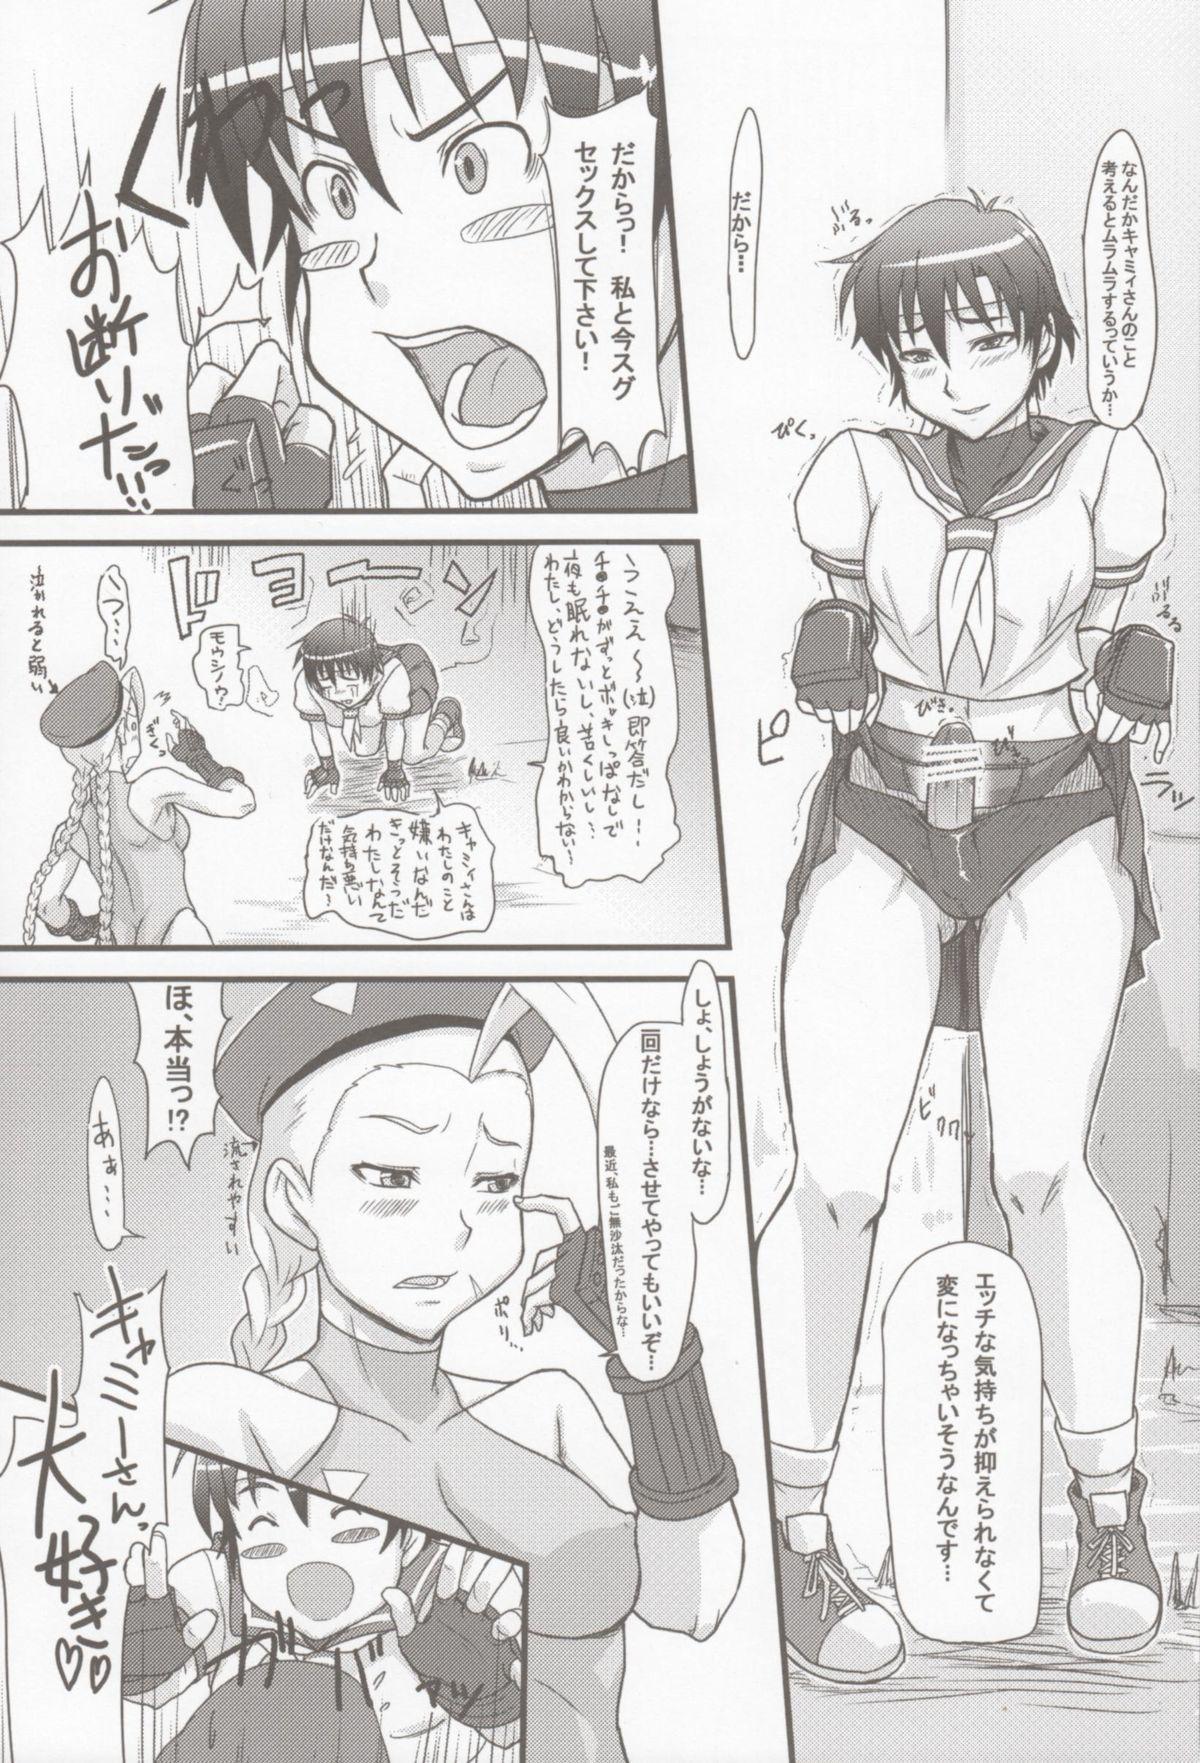 Dominatrix Cammy Saku! Fighter Material Vol. 2 - Street fighter Red - Page 8